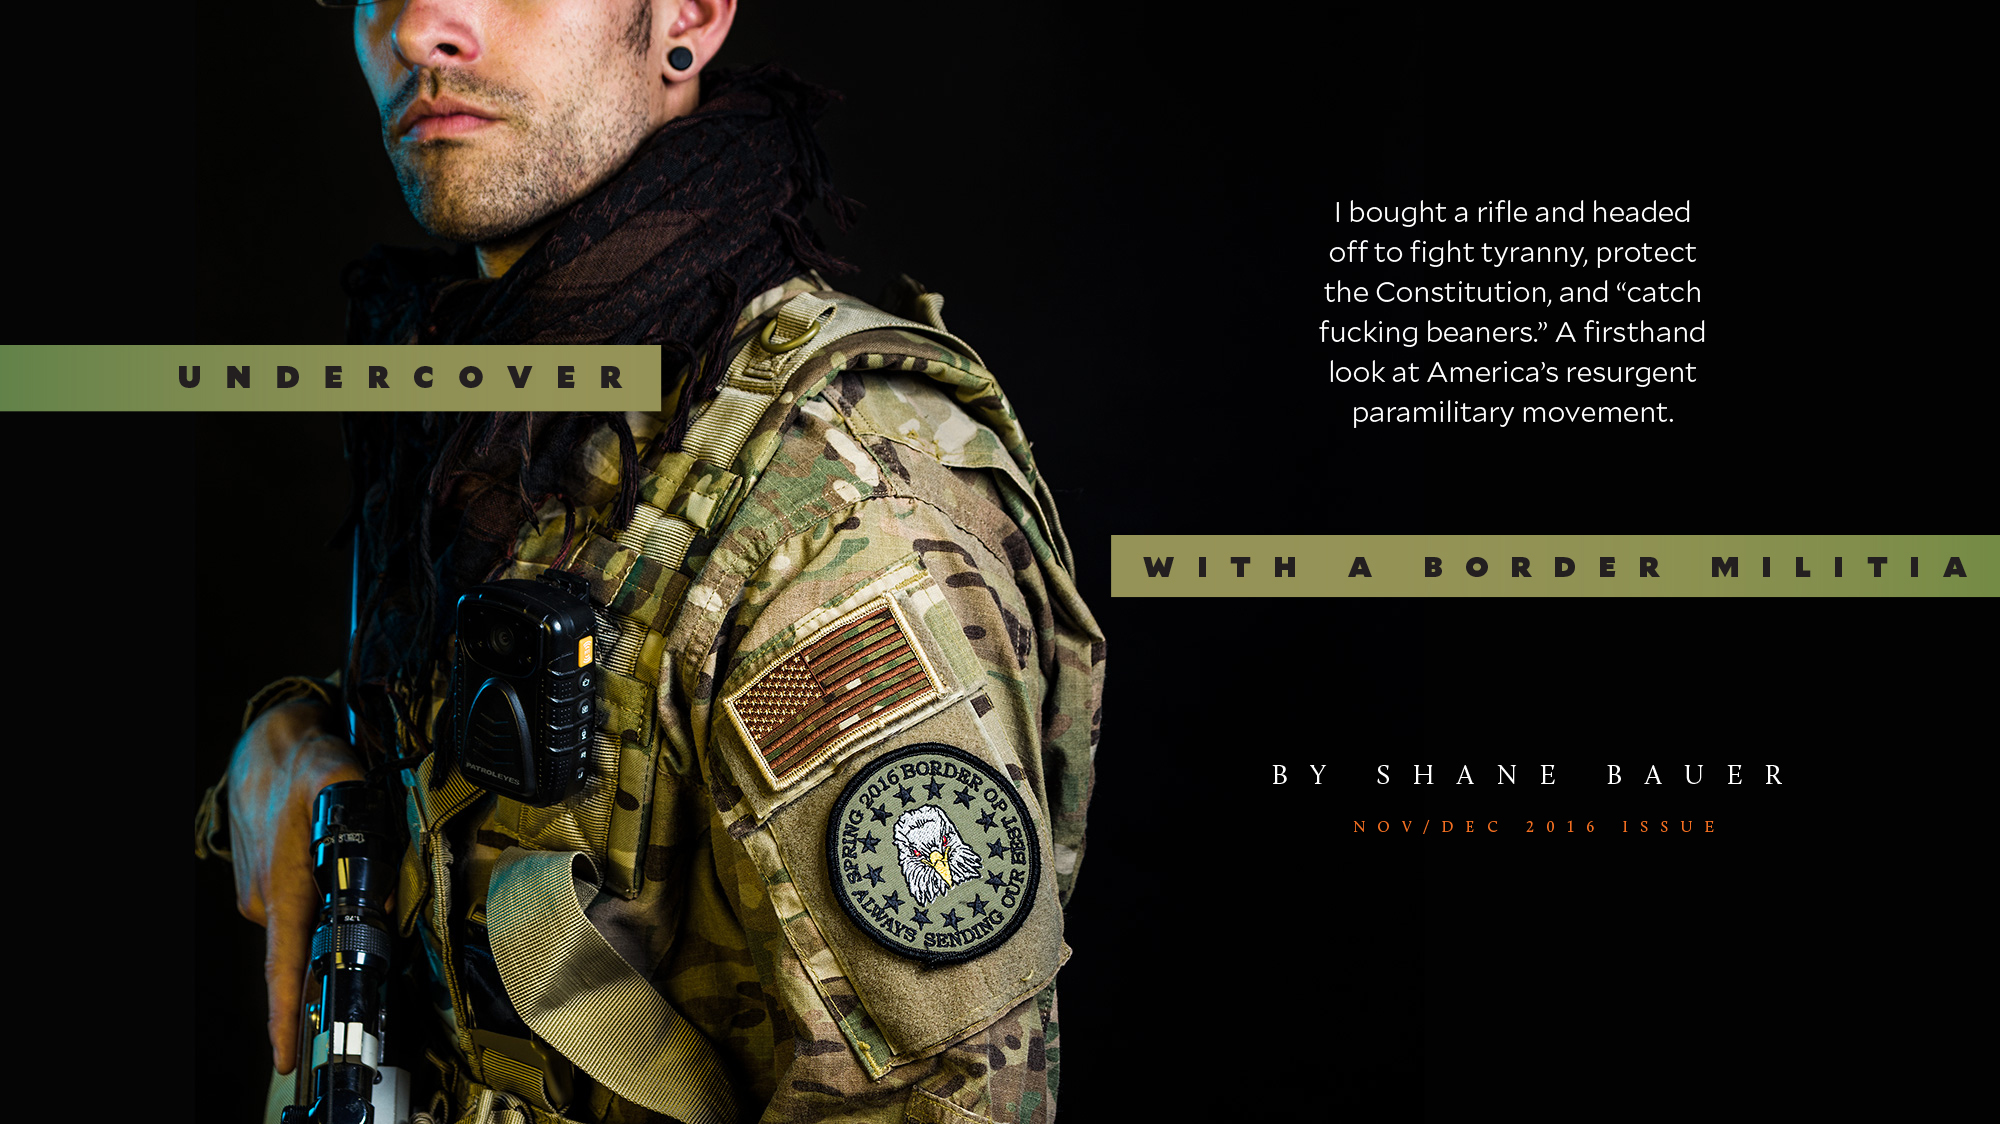 I Went Undercover With a Border Militia image